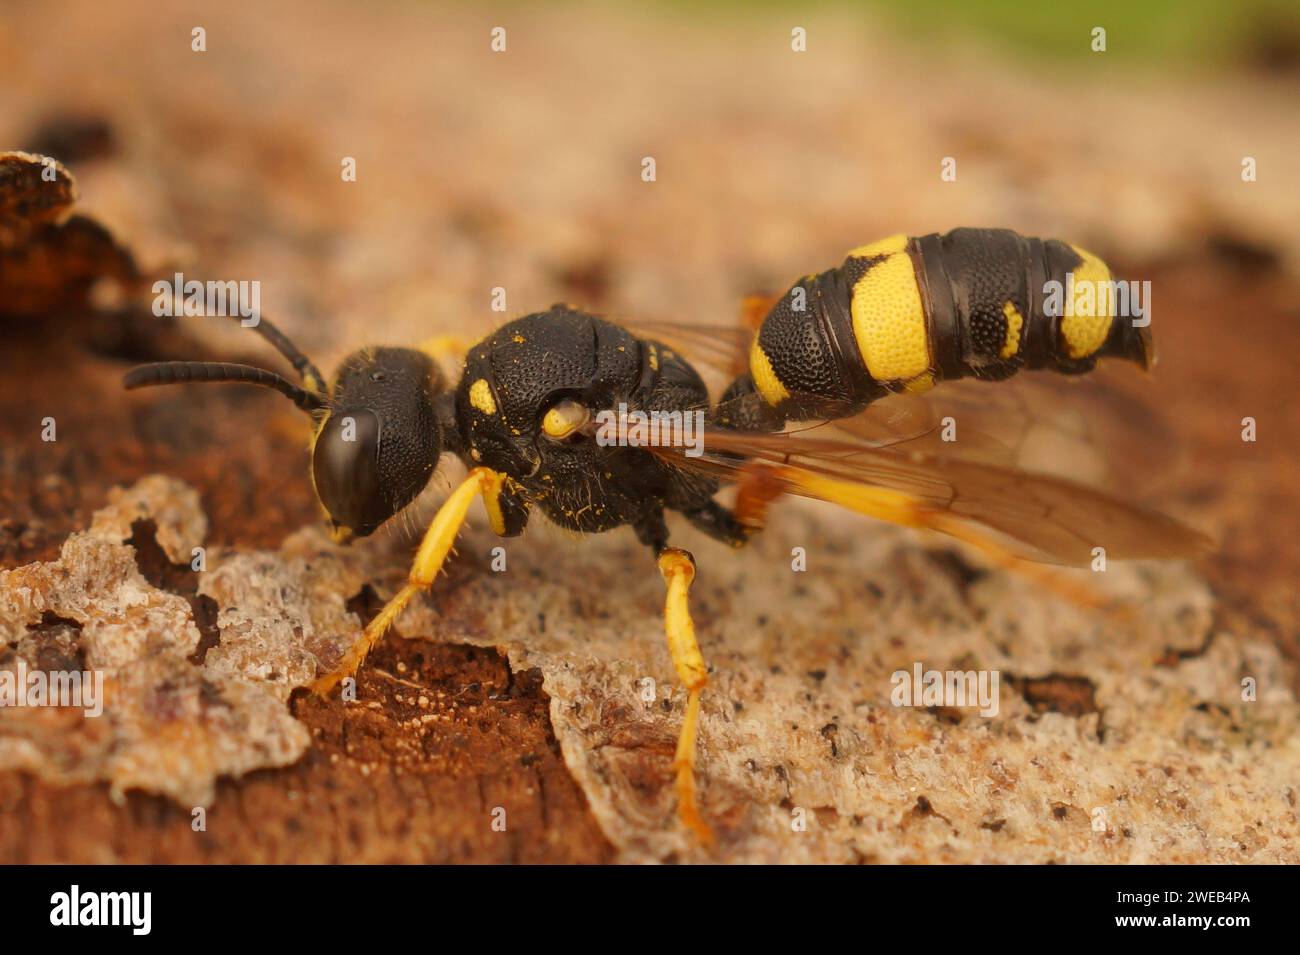 Natural closeup on the ornate tailed digger wasp, Cerceris rybyensis, a predator of furrow bees sitting on wood Stock Photo